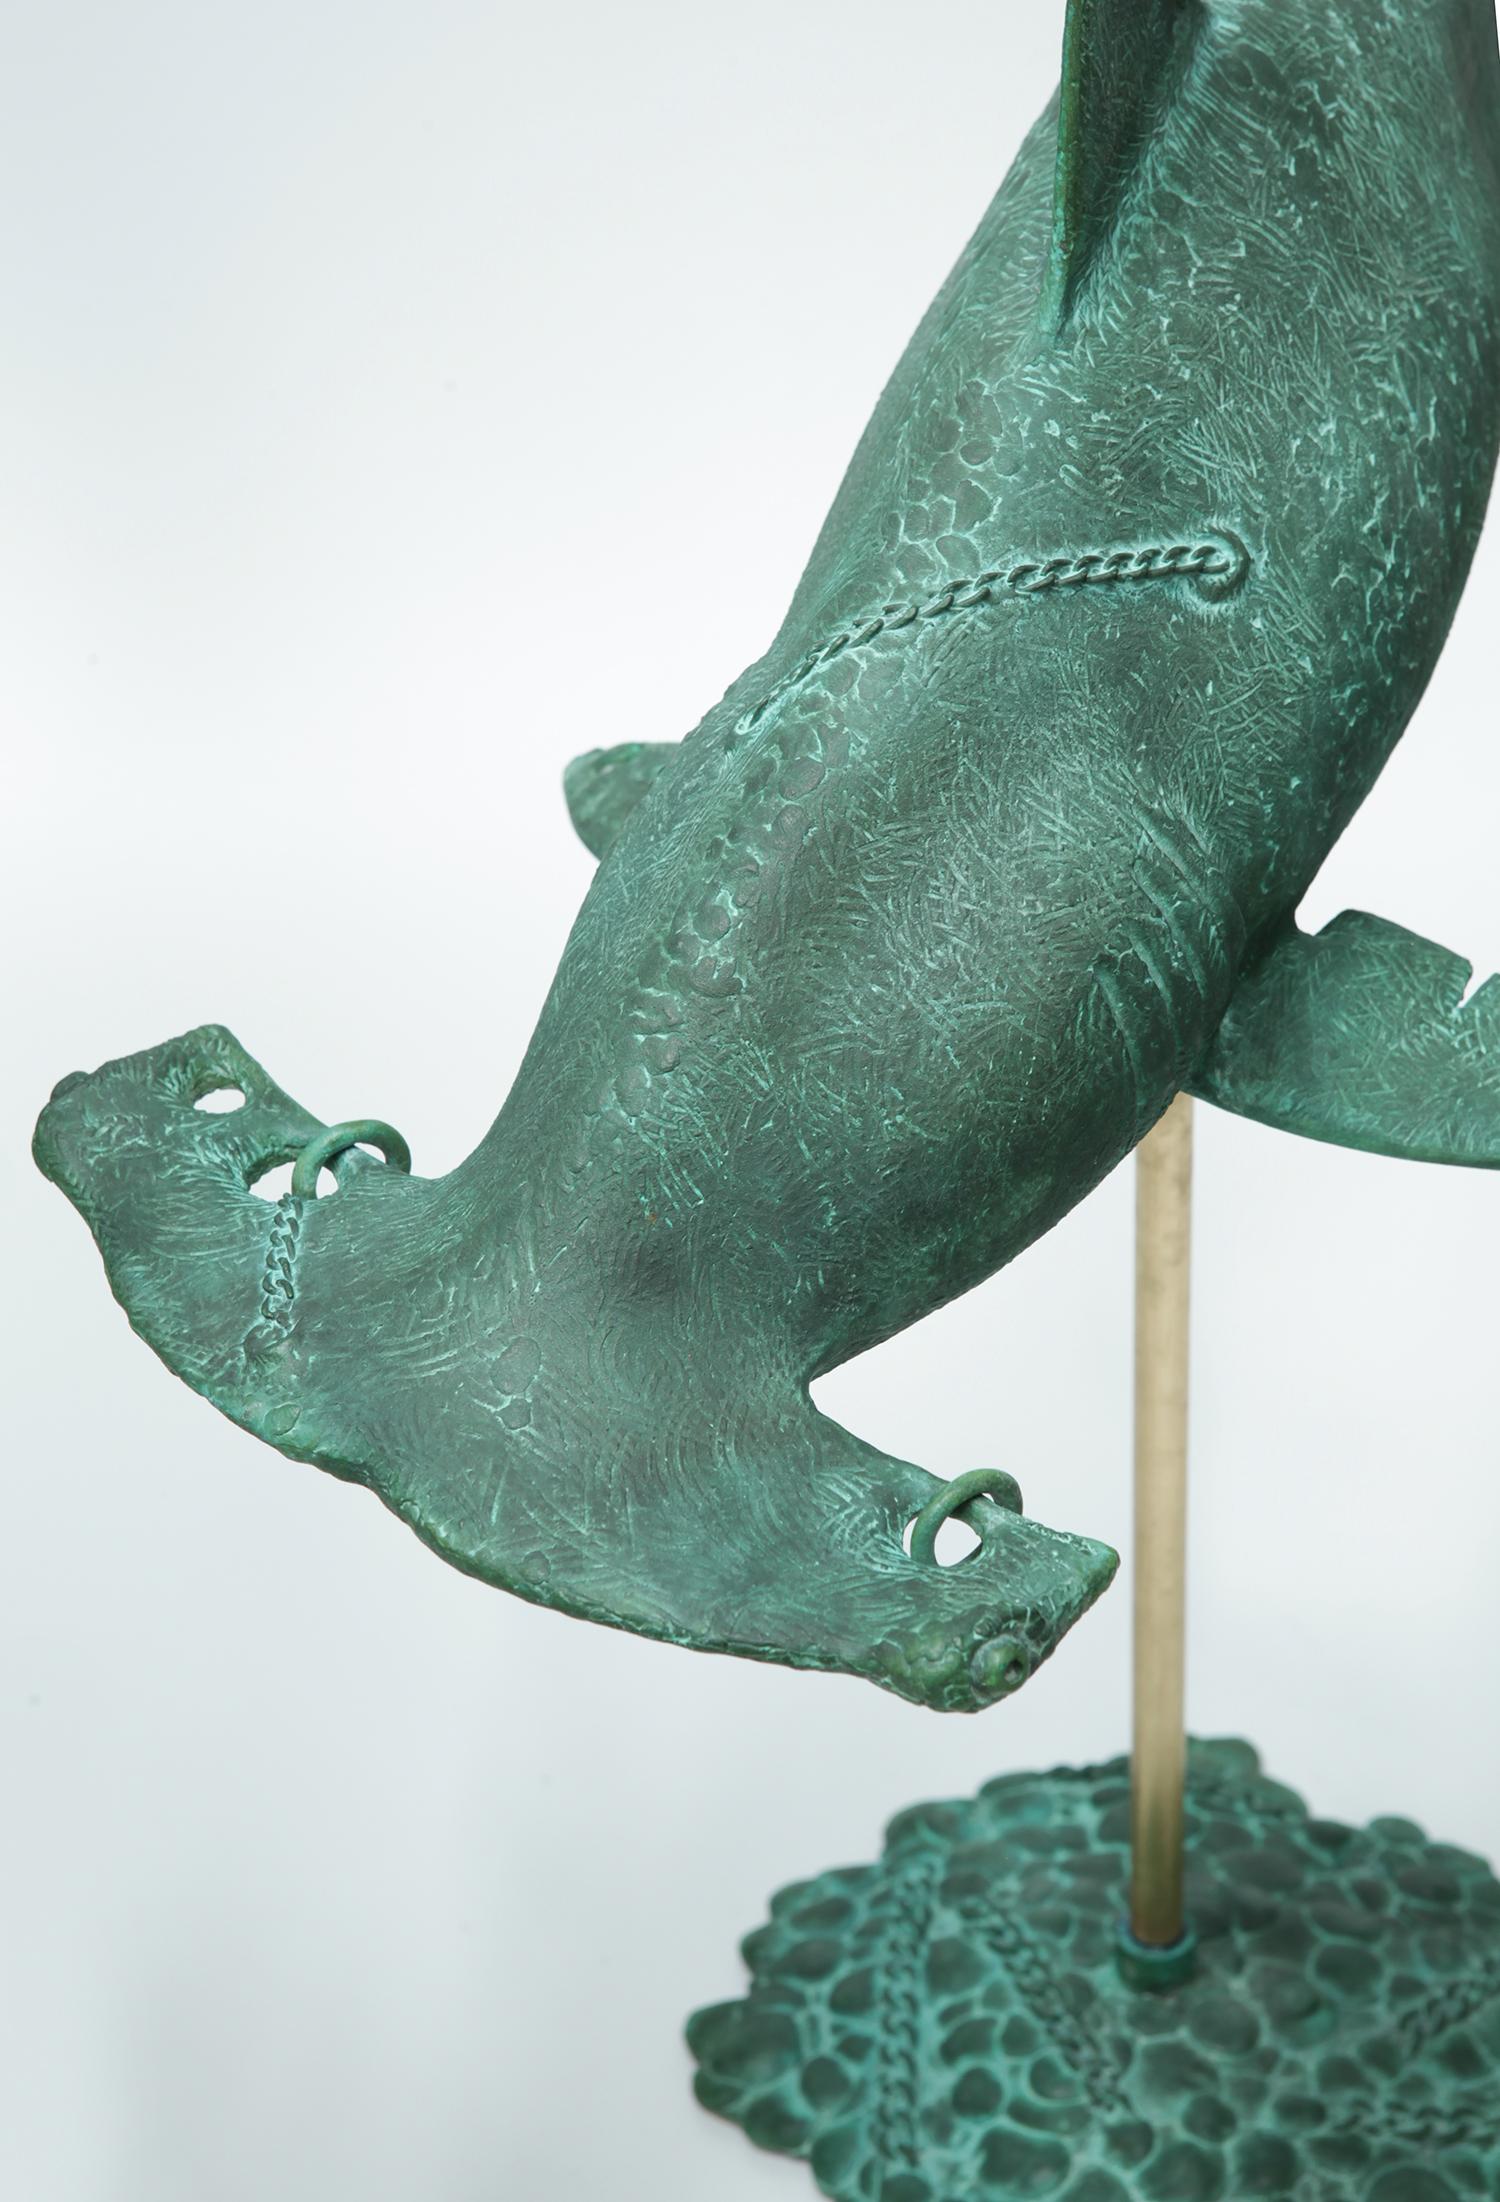 Original fish sculpture by the Ukrainian sculptor Volodymyr Mykytenko.
5/12 edition.
Excellent condition.
Materials: Bronze.

Please contact us if you have any questions about this piece.

Shipping worldwide in a wooden crate.